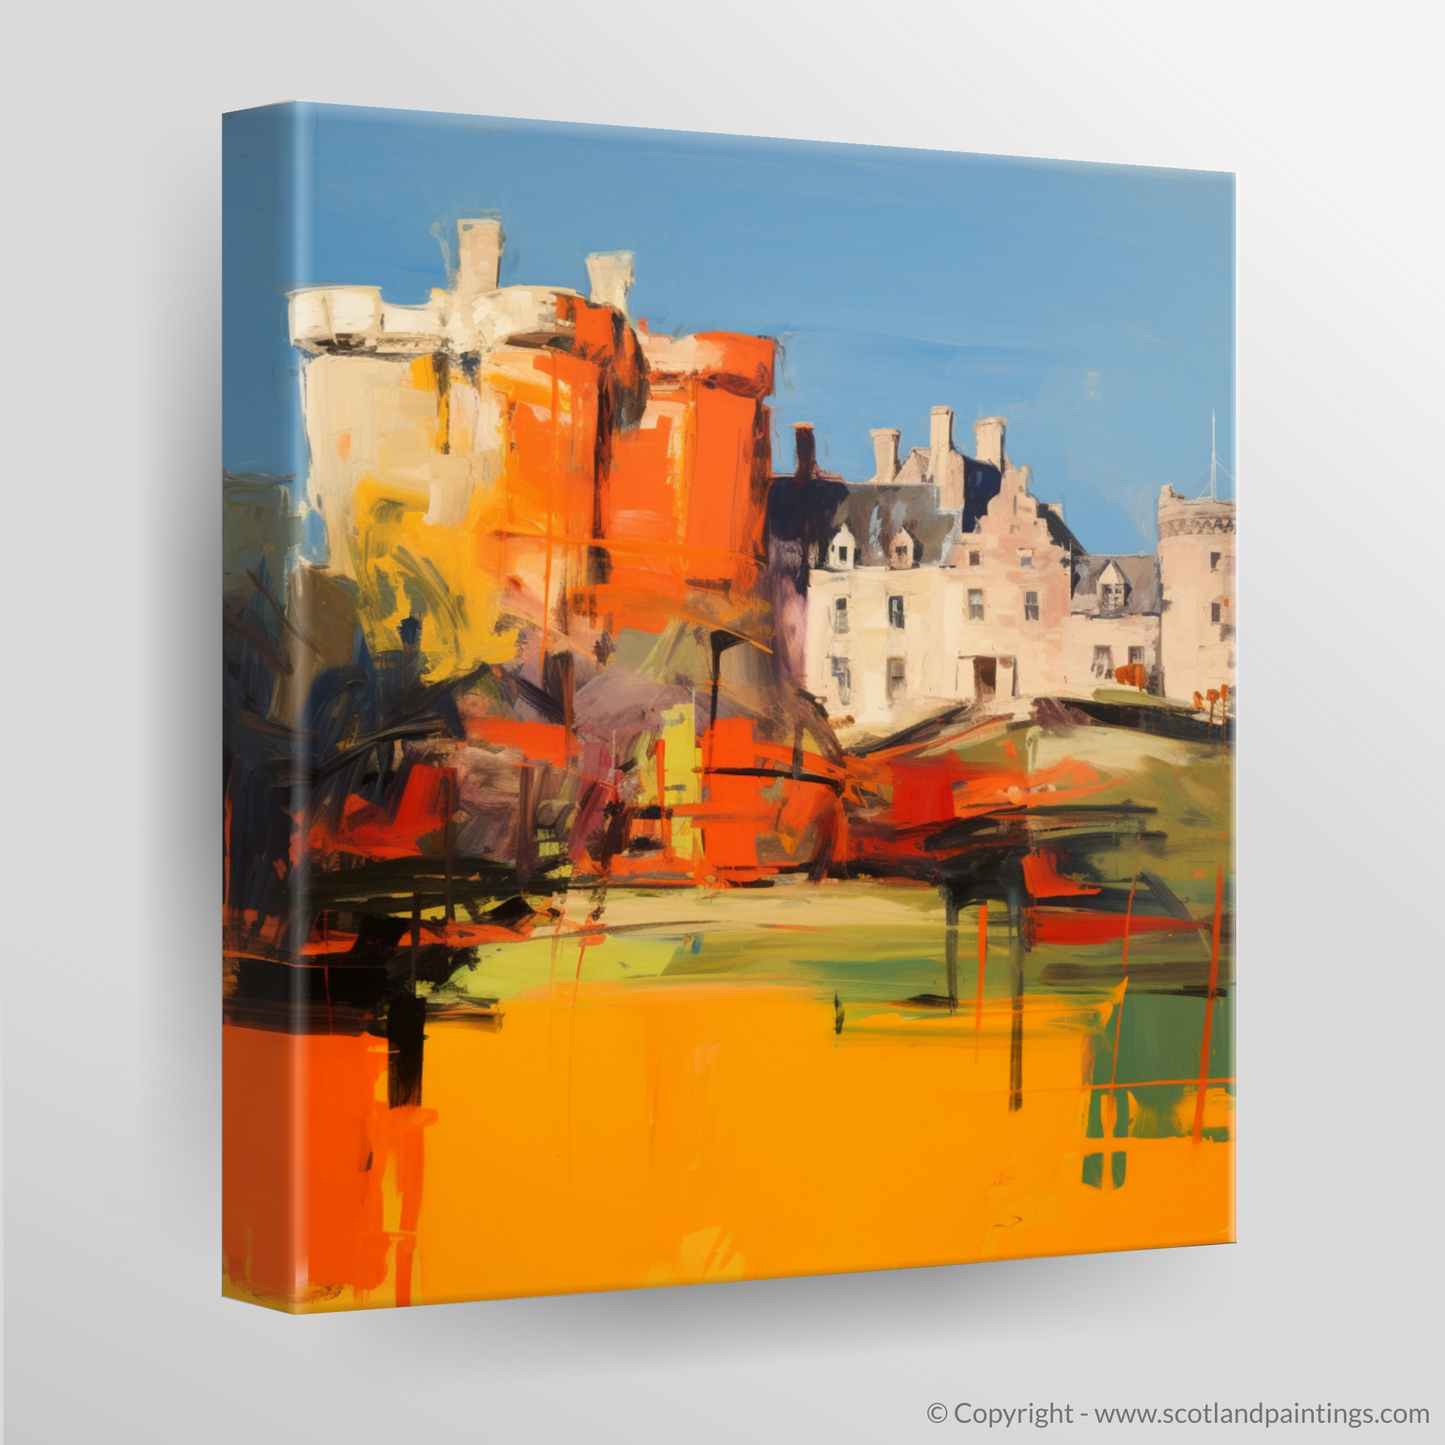 Culzean Castle Reimagined: An Abstract Expressionist Journey